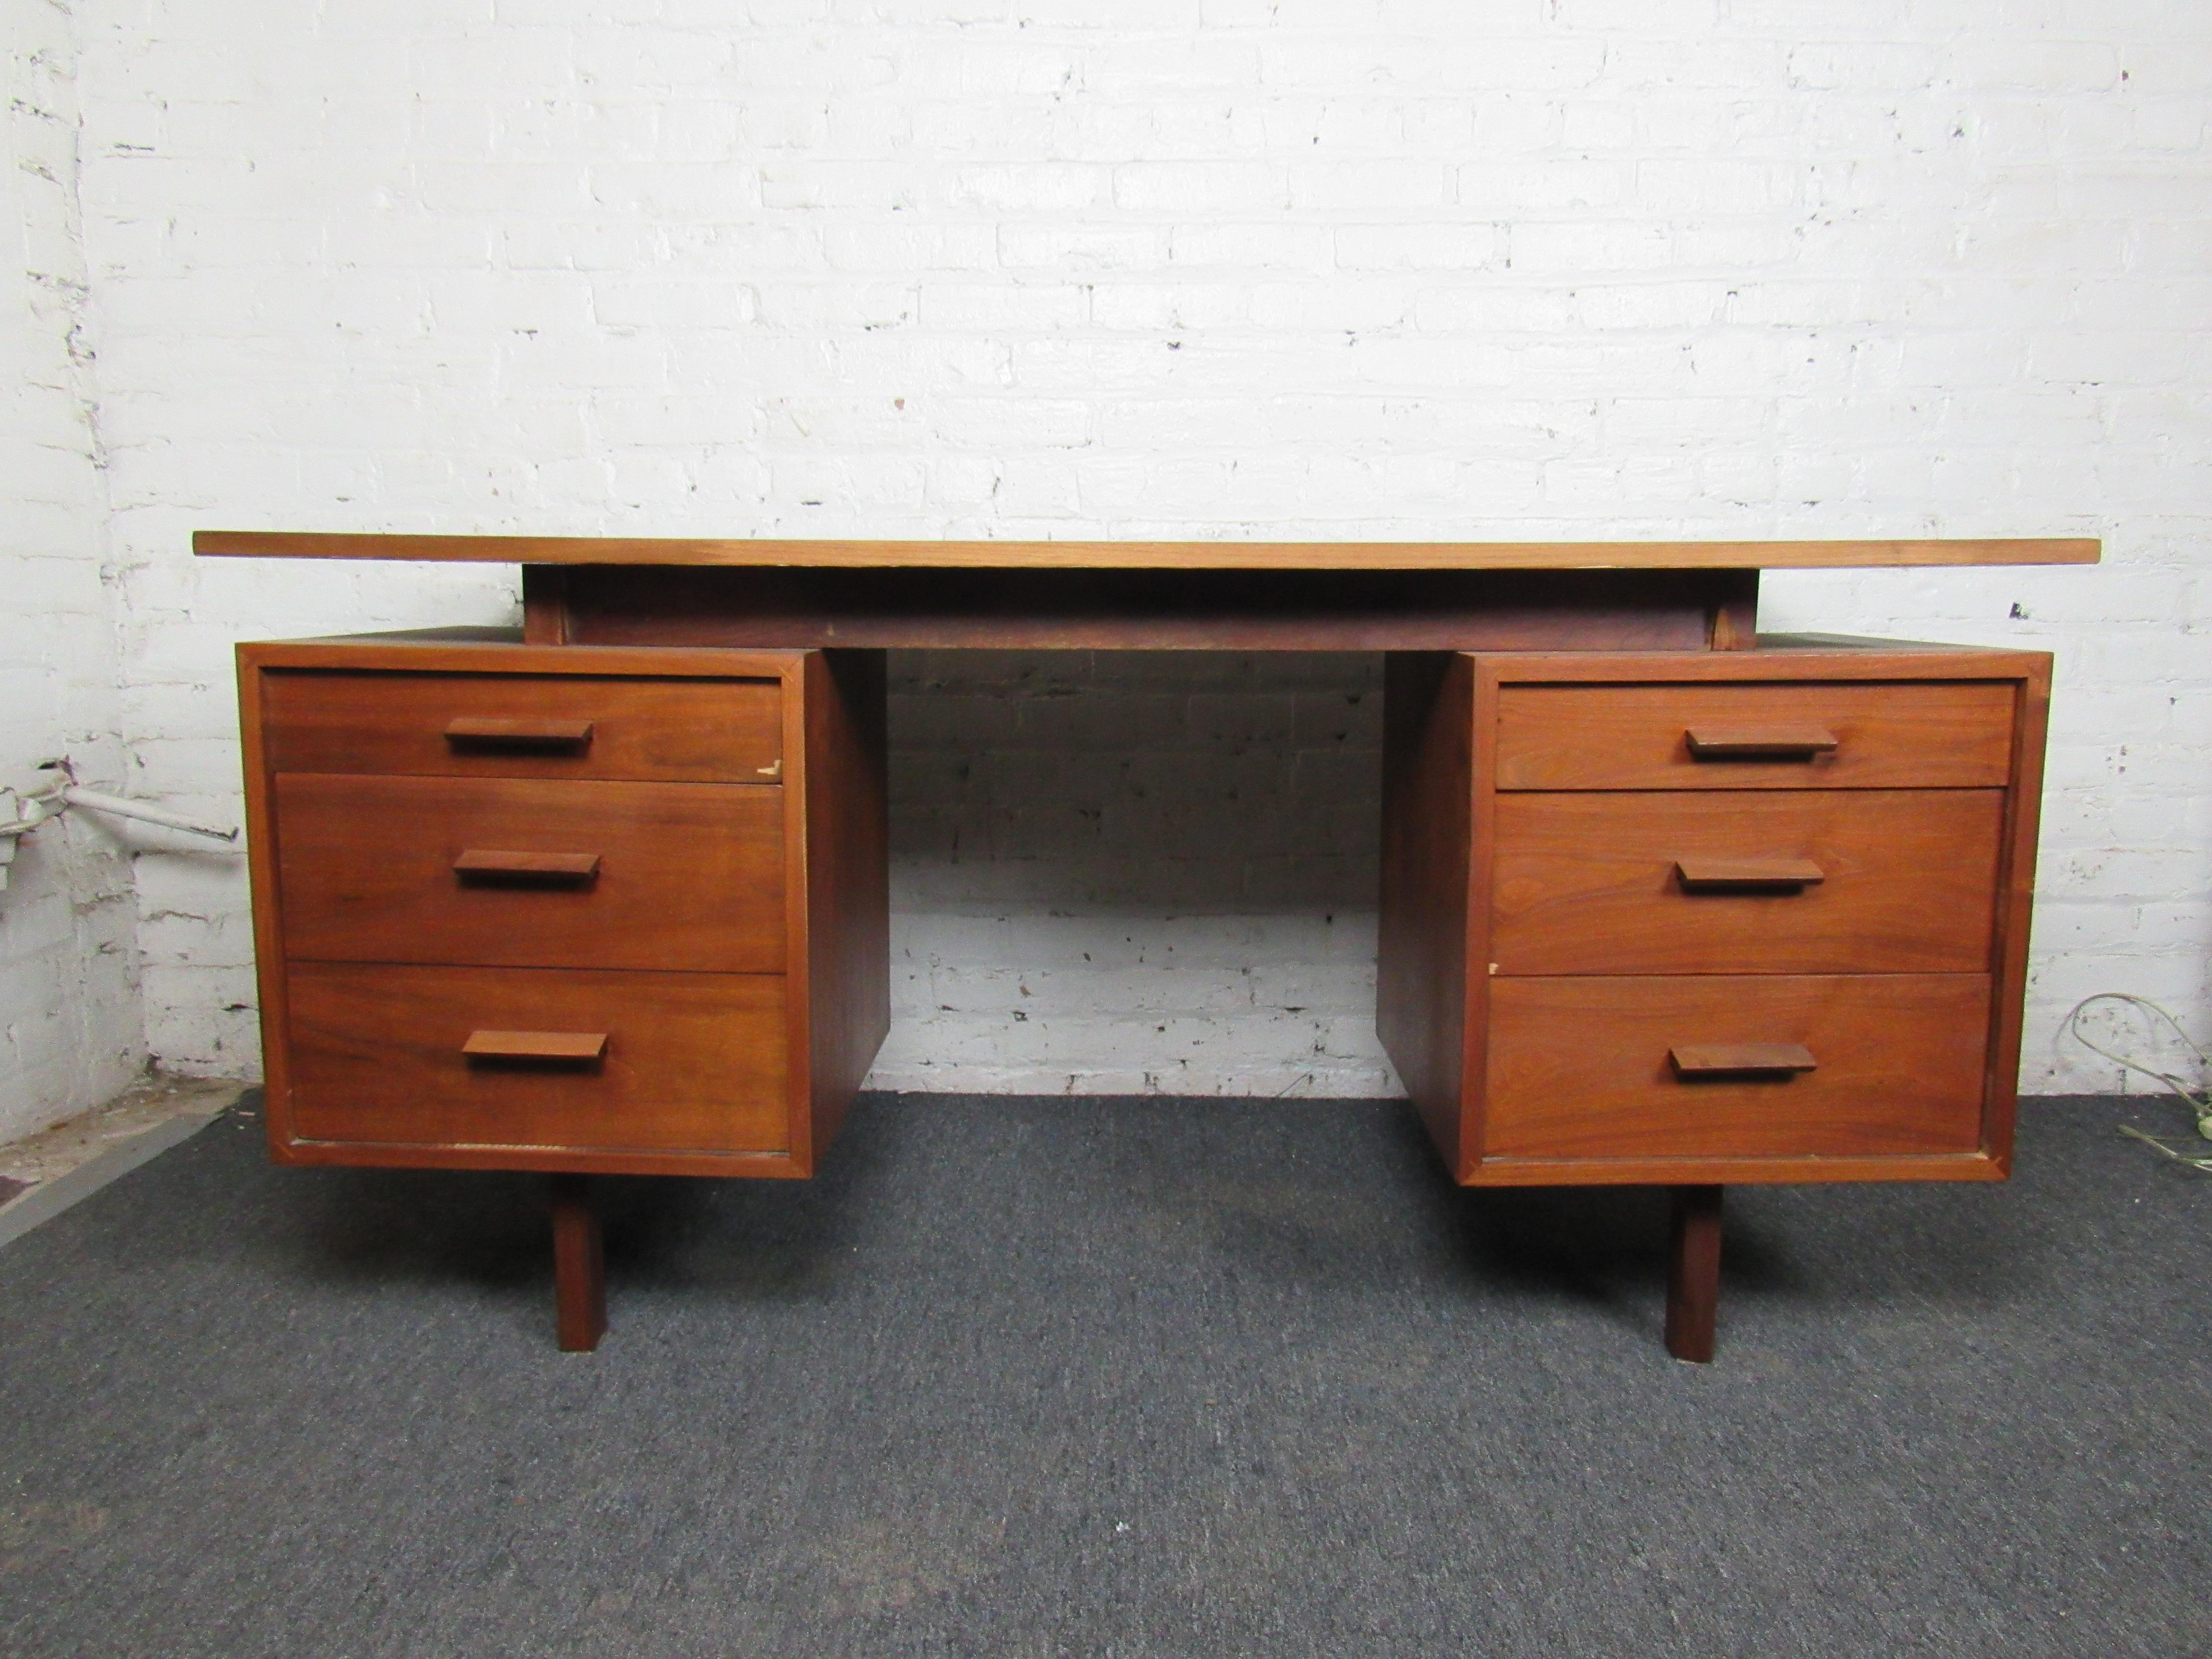 An incredible vintage desk full of Mid-Century Modern style and craftsmanship. Teak grain shows off a beautiful warm woodgrain and offers sturdy quality, while six drawers allow for storage and organization. Please confirm item location with seller